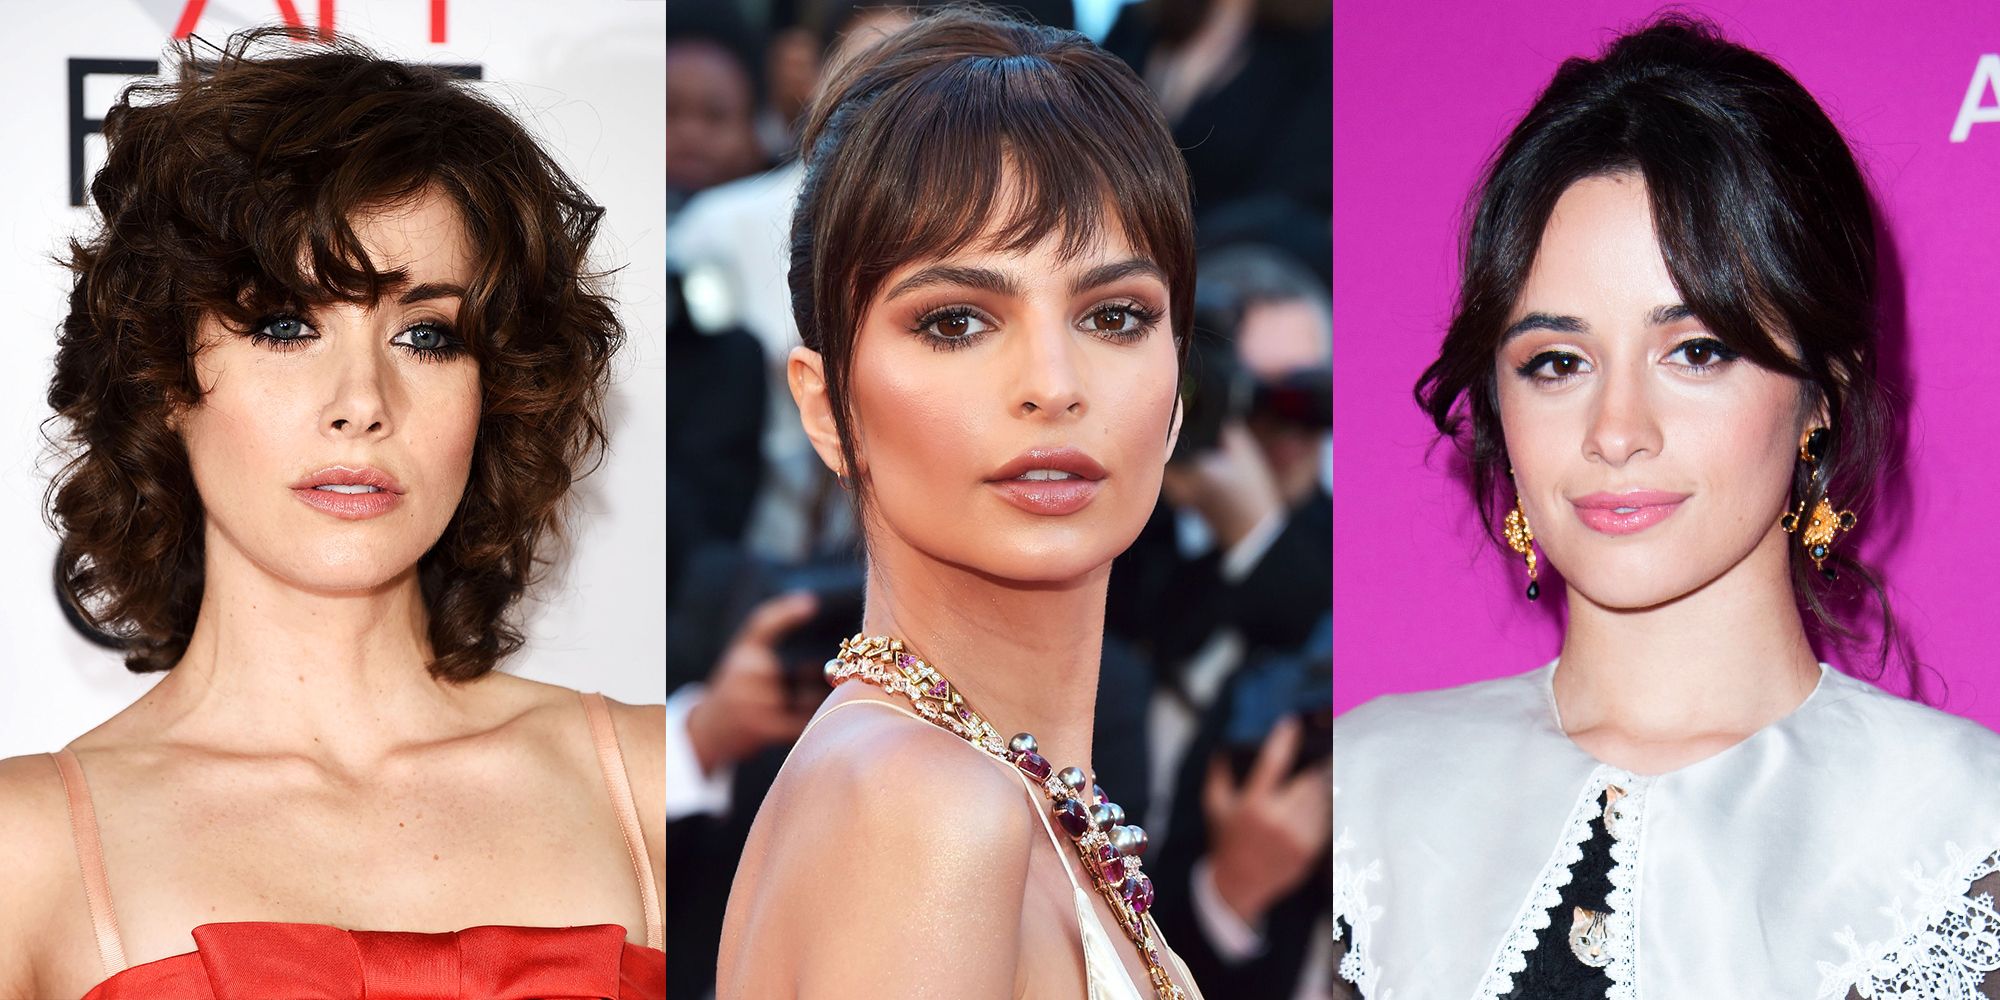 112 hairstyles with bangs you'll want to copy - celebrity